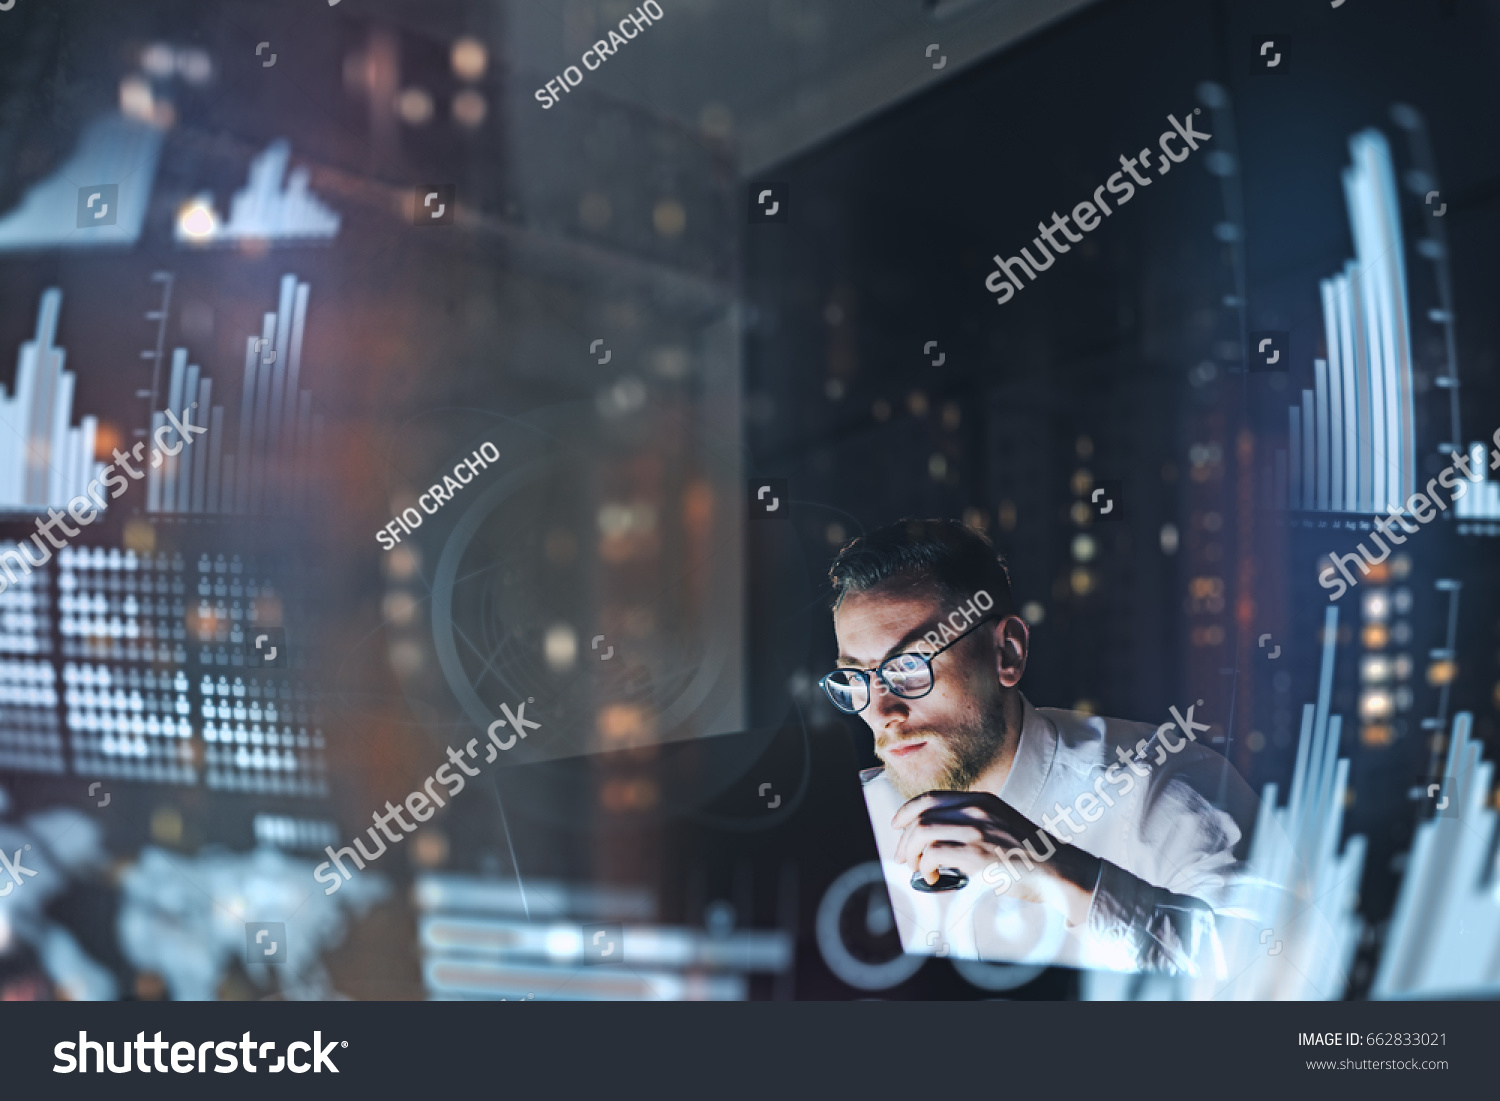 Concept of digital diagram,graph interfaces,virtual screen,connections icon.Young finance analist working at modern office.Man using contemporary laptop at night,blurred background.Horizontal #662833021